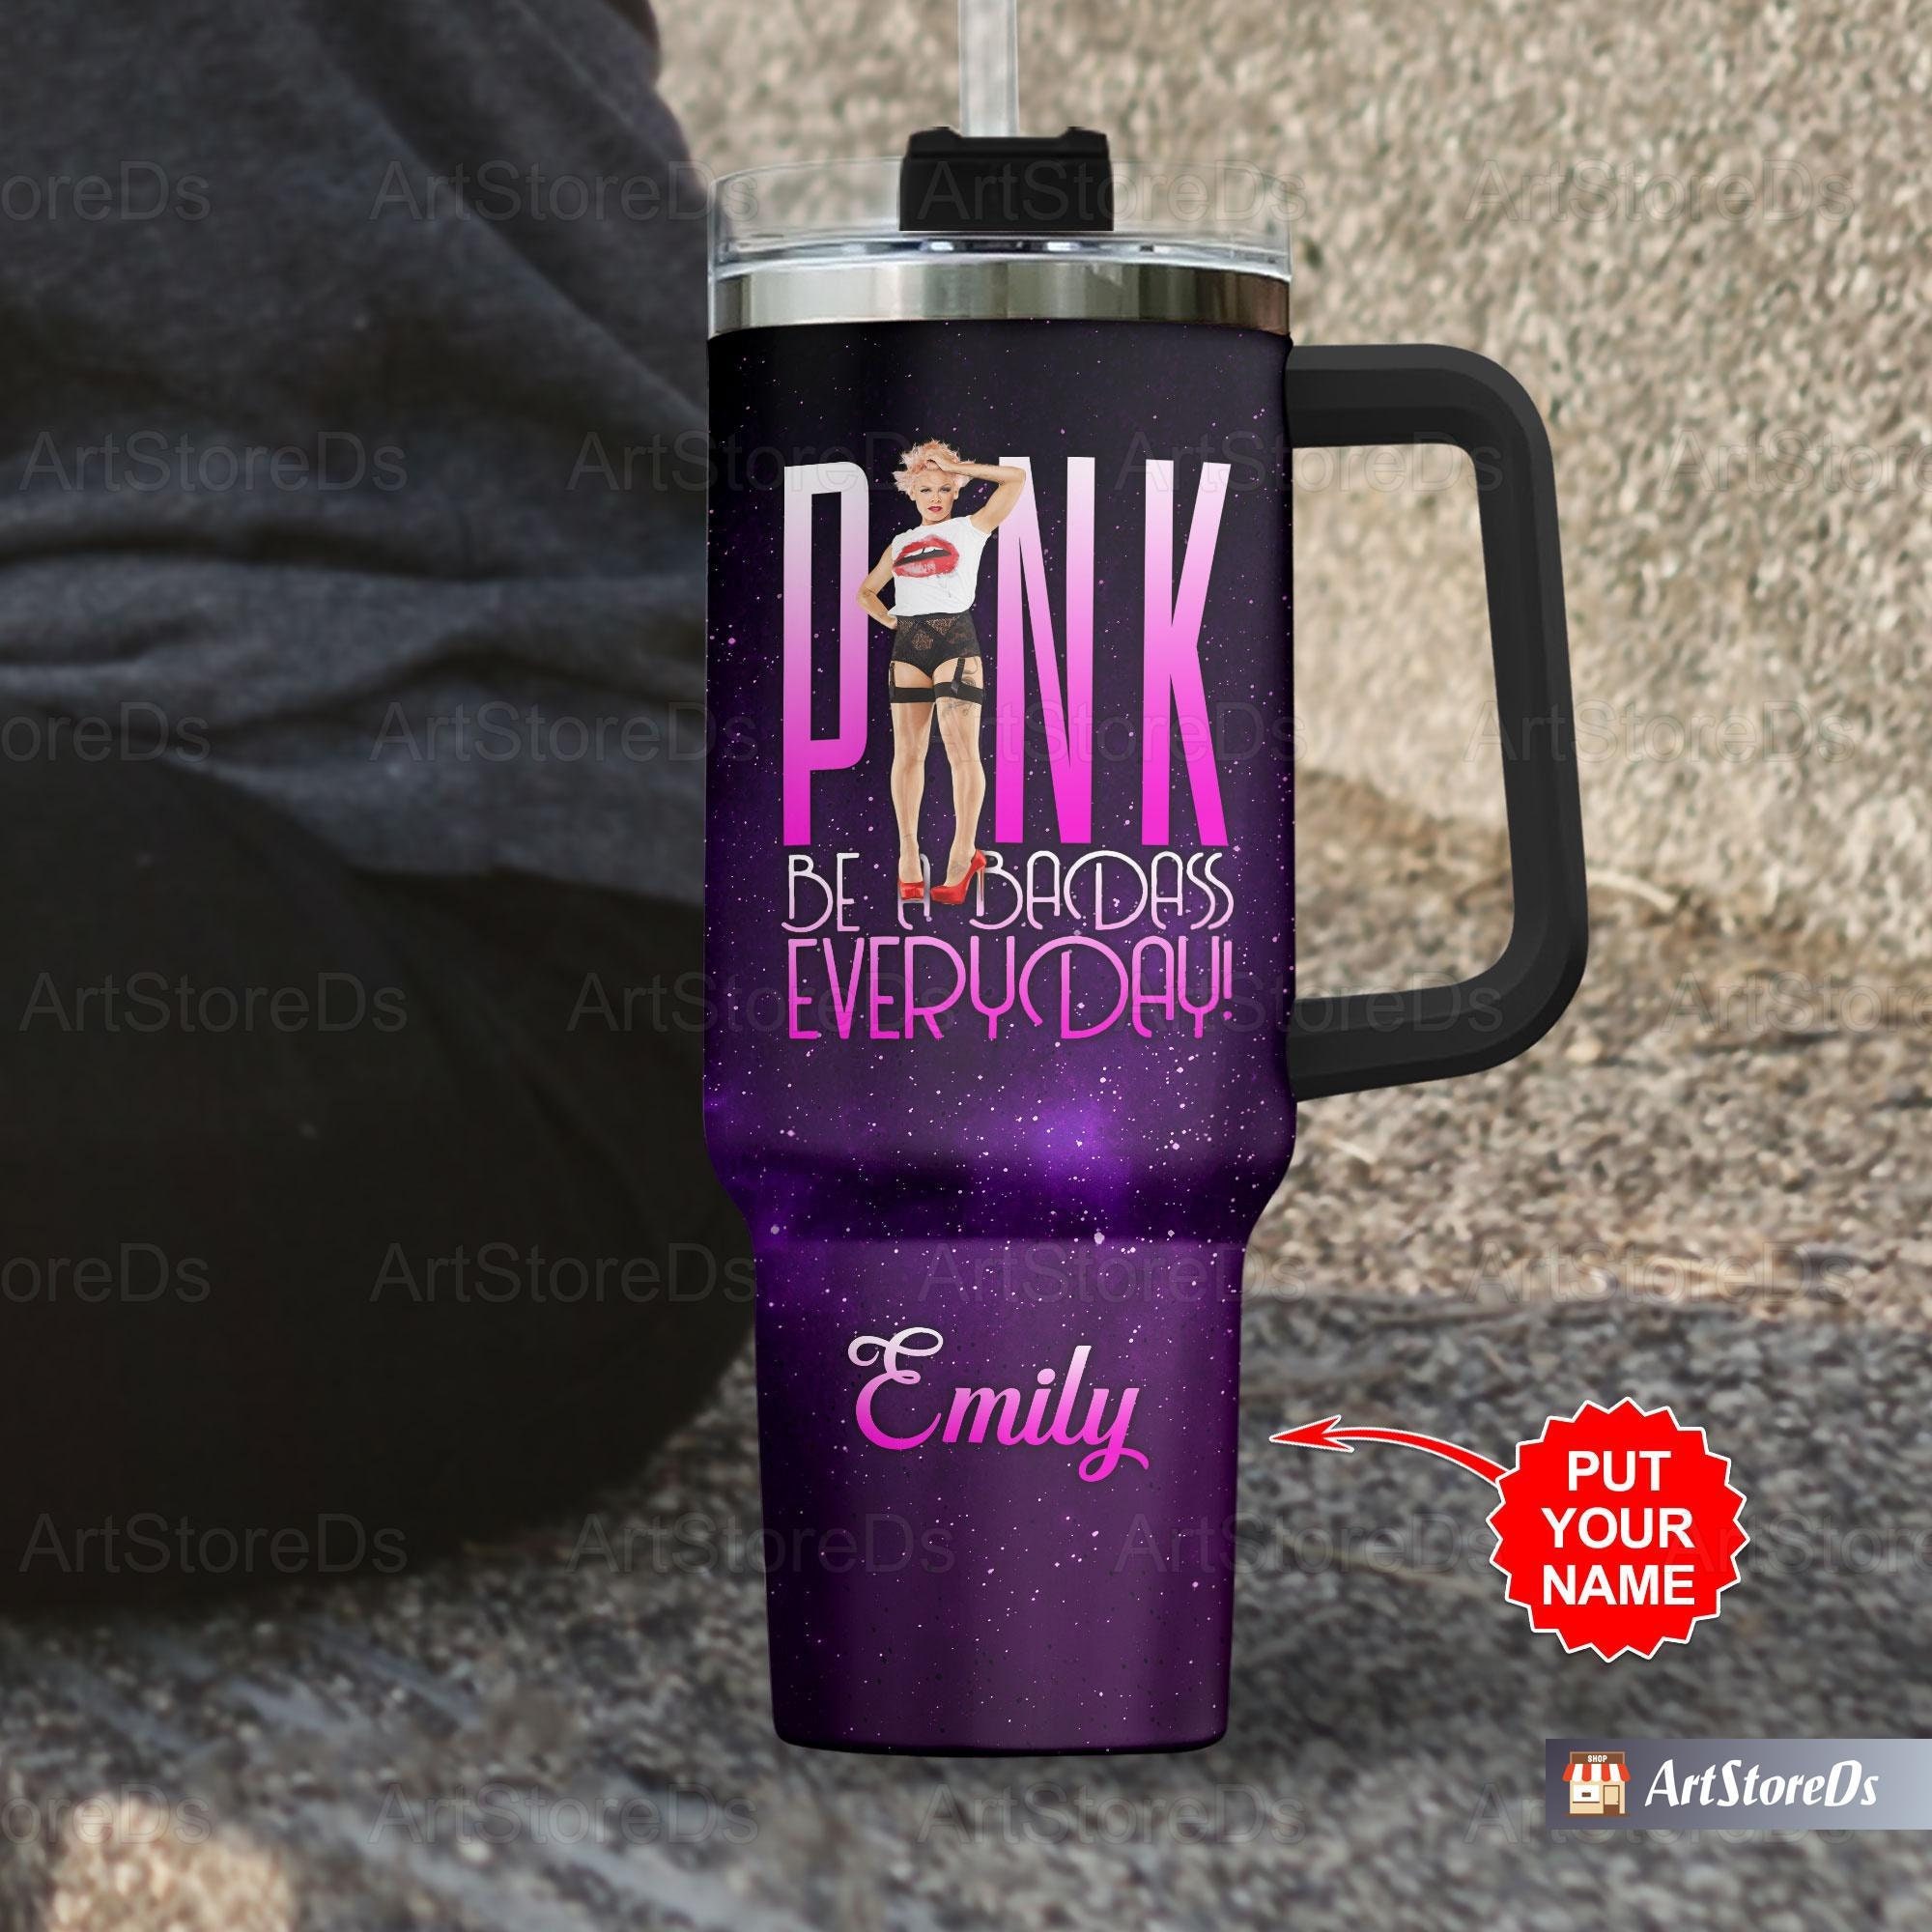 Personalized Pink P!nk Tumbler 40oz with Handle